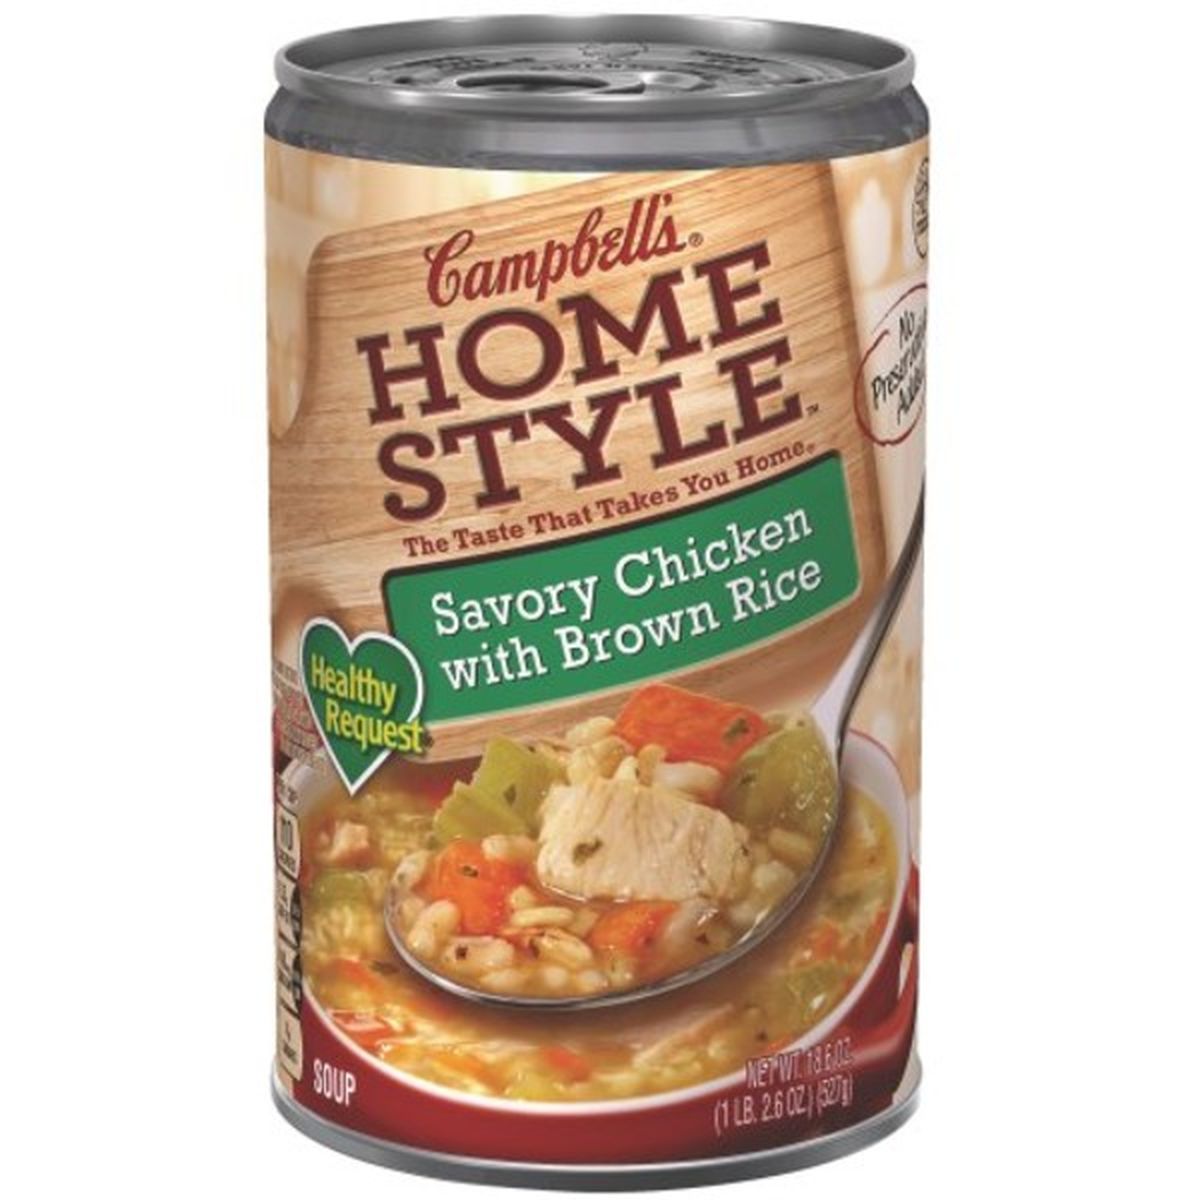 Calories in Campbell'ss Homestyle Healthy Requests Homestyle Healthy Request Savory Chicken with Brown Rice Soup